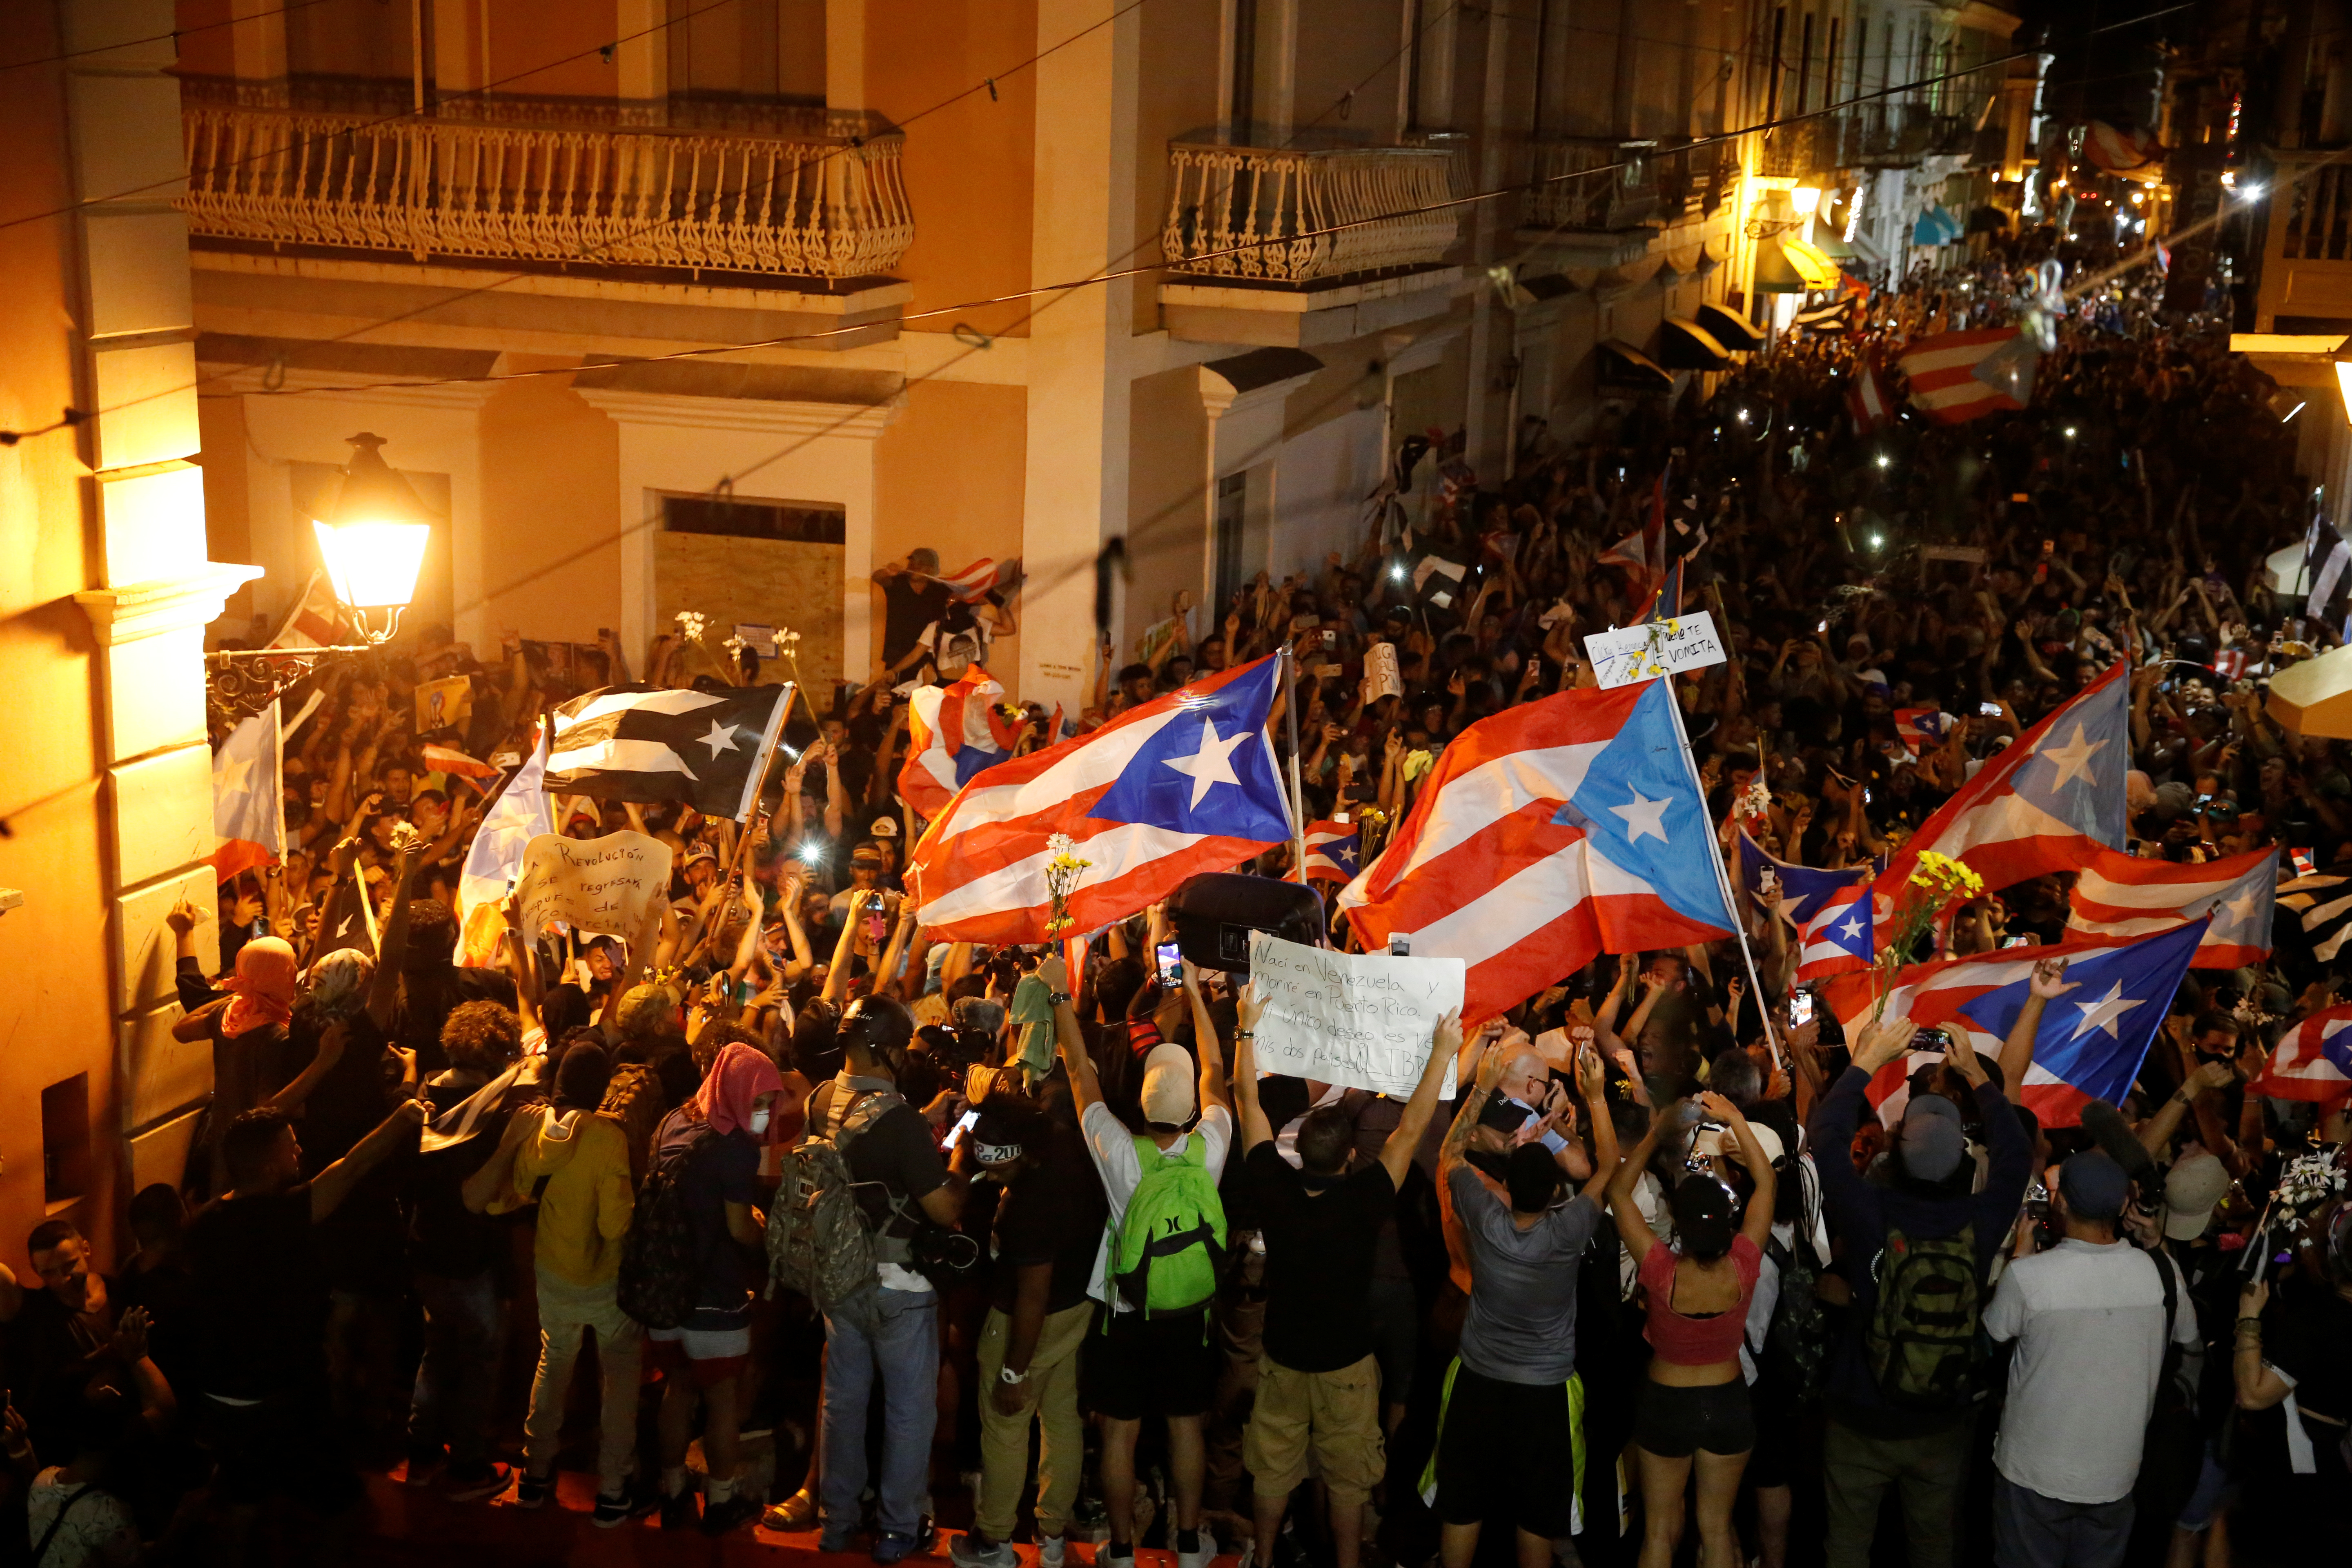 People react after Puerto Rican Governor Ricardo Rossello broadcasted his resignation, in San Juan, Puerto Rico July 24, 2019. (REUTERS/Marco Bello)